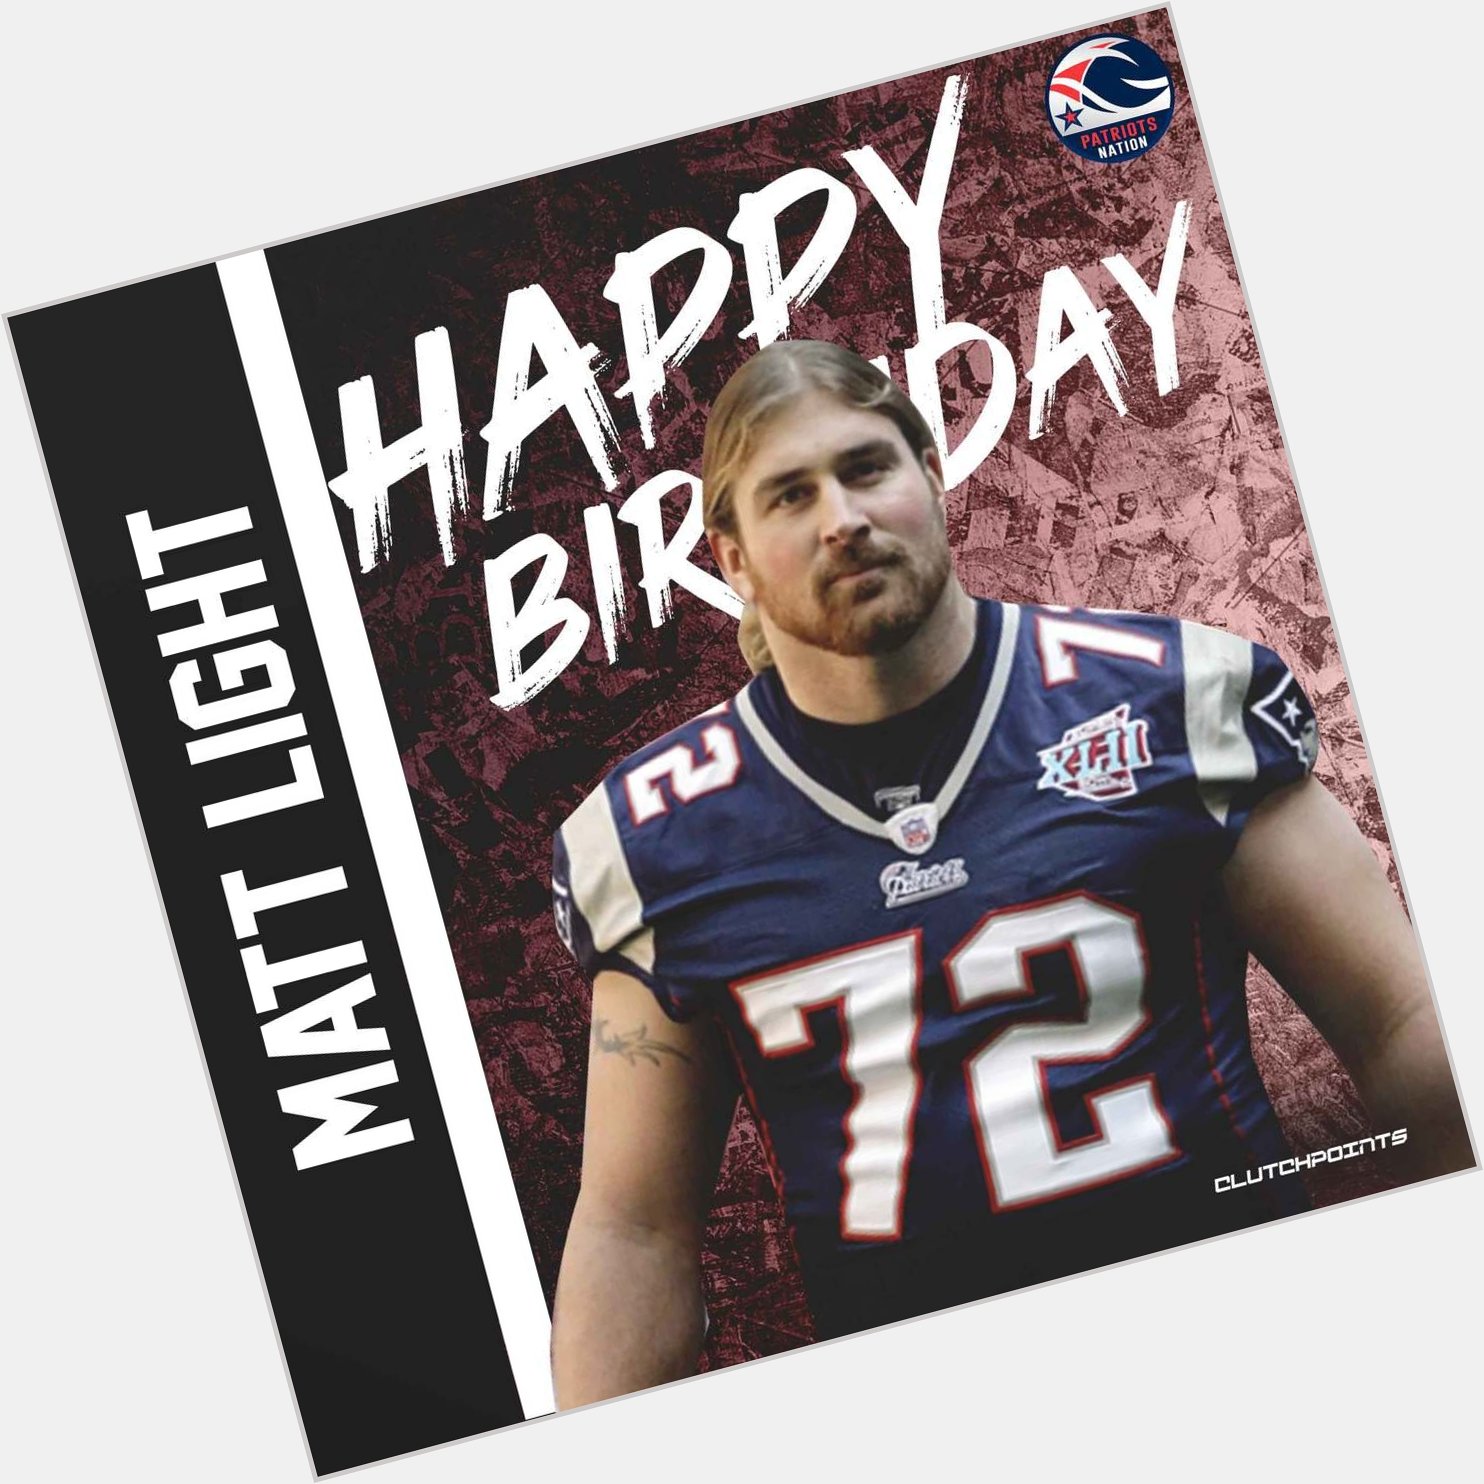 Patriots Nation, let\s wish a happy 44th birthday to the 3 time Super Bowl Champion Matt Light 